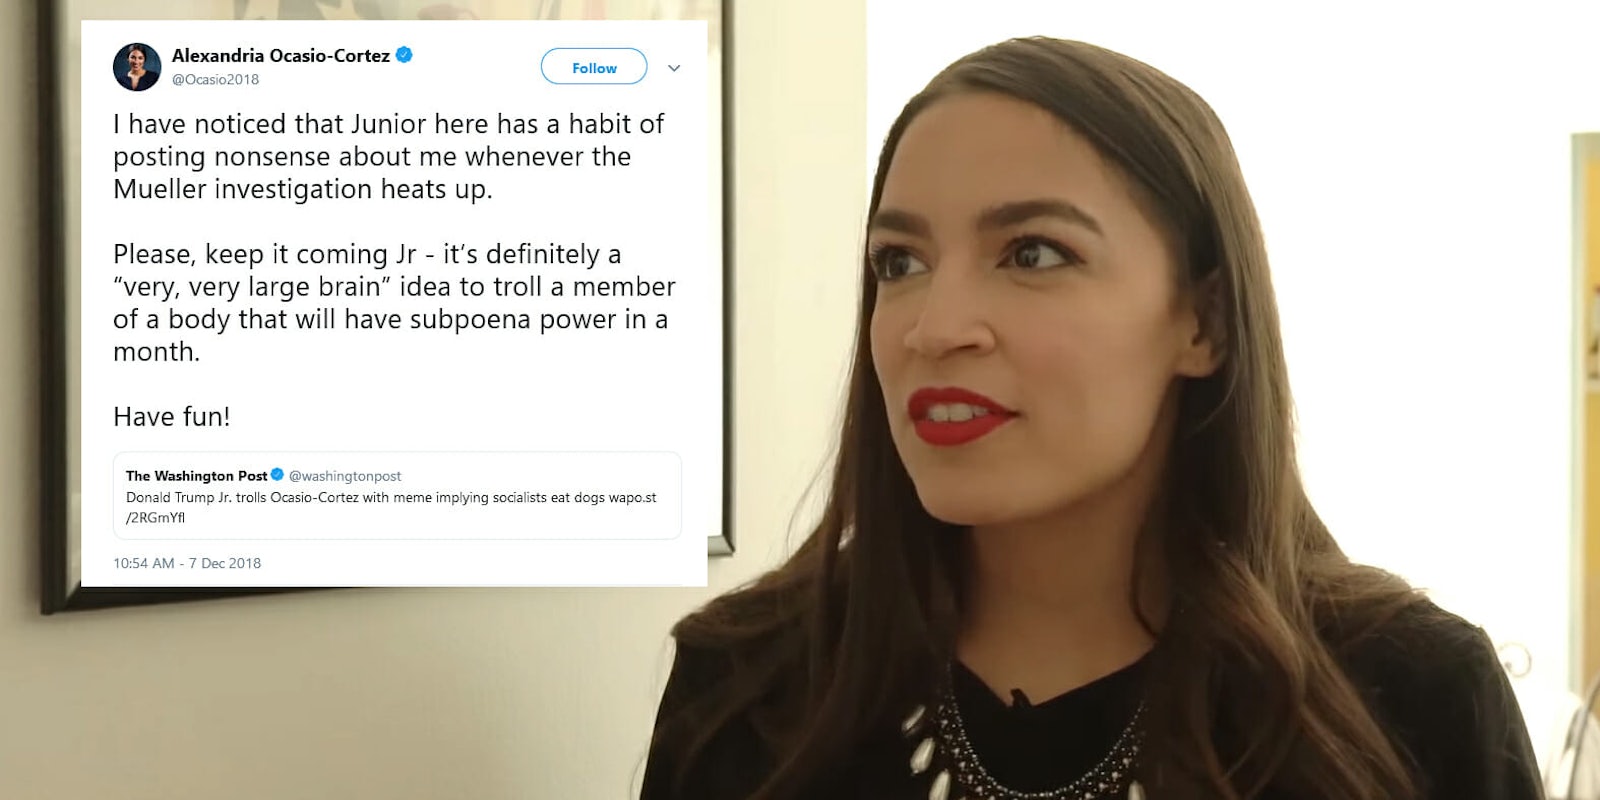 Representative-elect Alexandria Ocasio-Cortez fired back at Donald Trump Jr. hours after he posted an anti-socialism meme featuring a picture of her that implied Americans would eat dogs if they adopted that kind of economy.